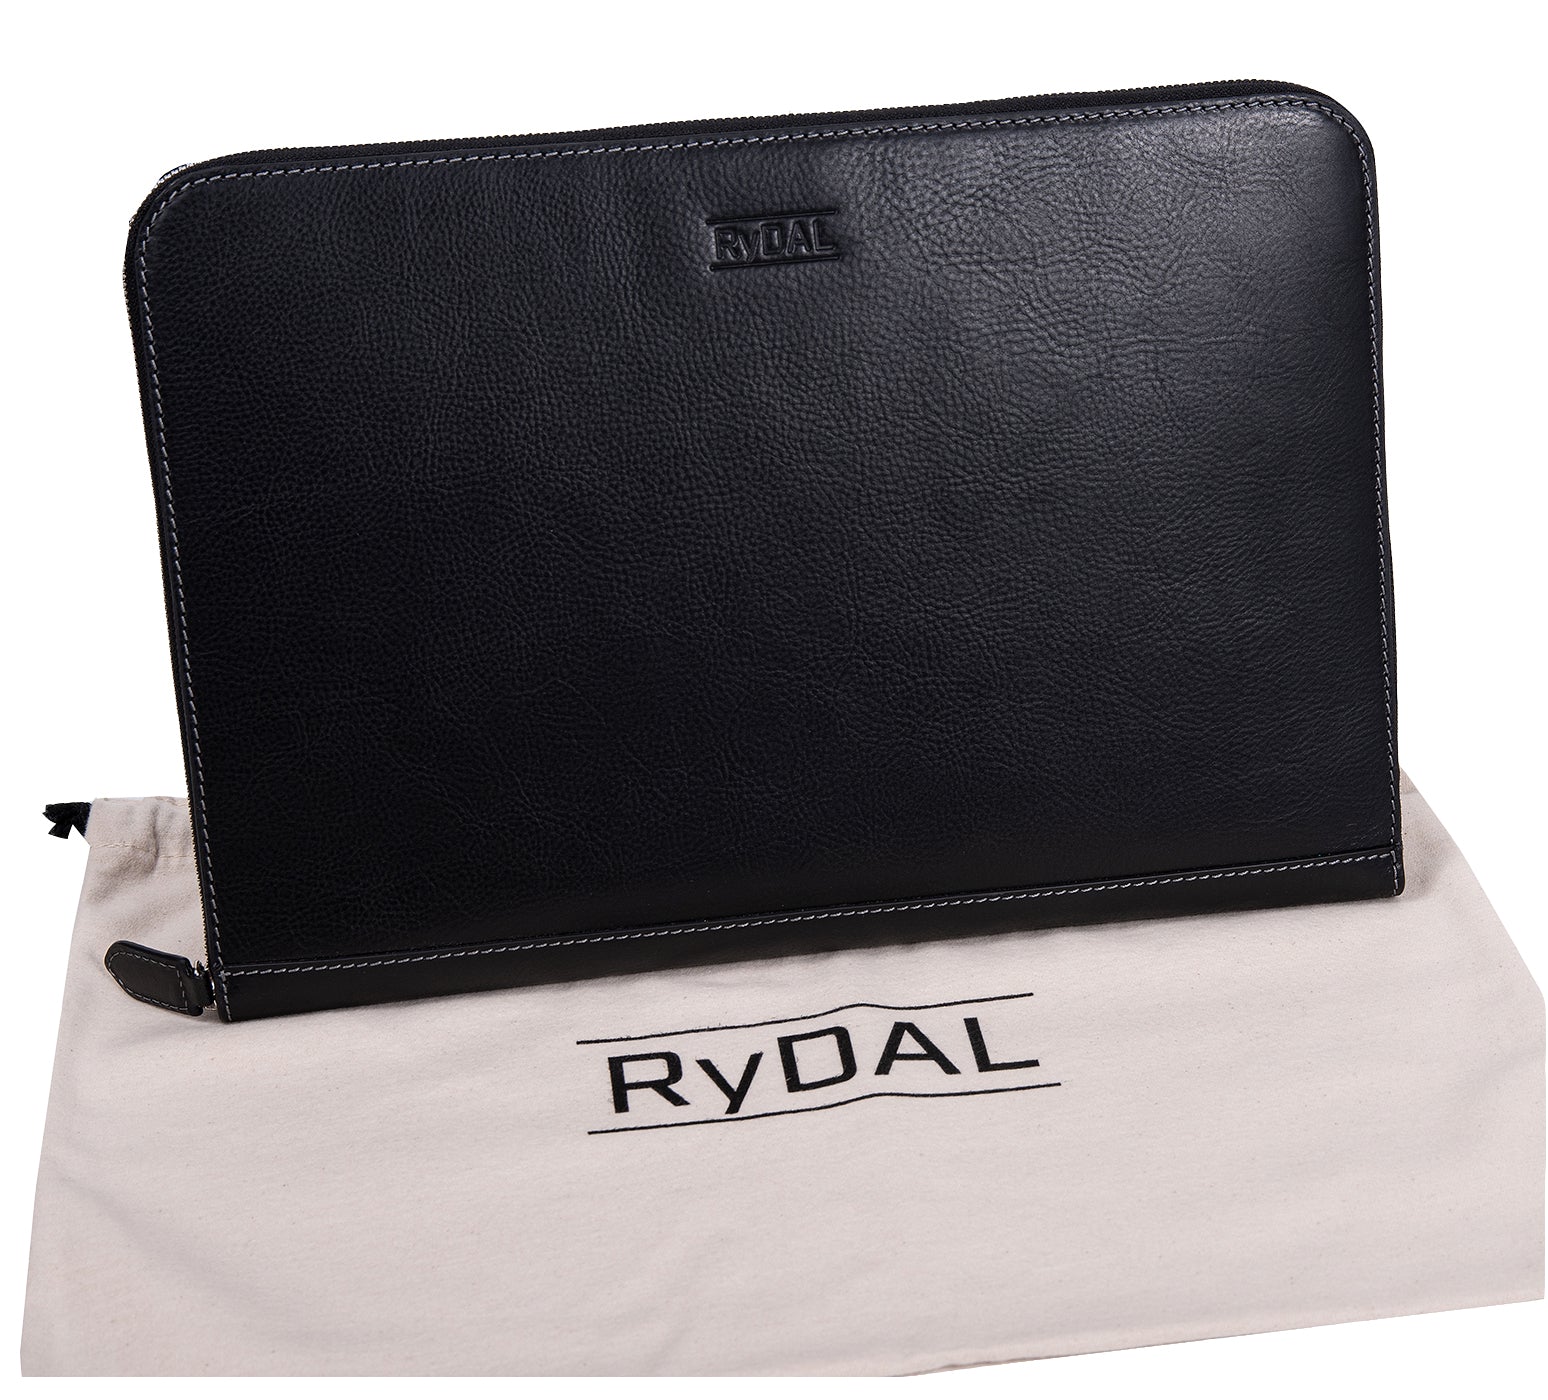 Albany Leather Document Holder from Rydal in 'Black' with cotton bag.